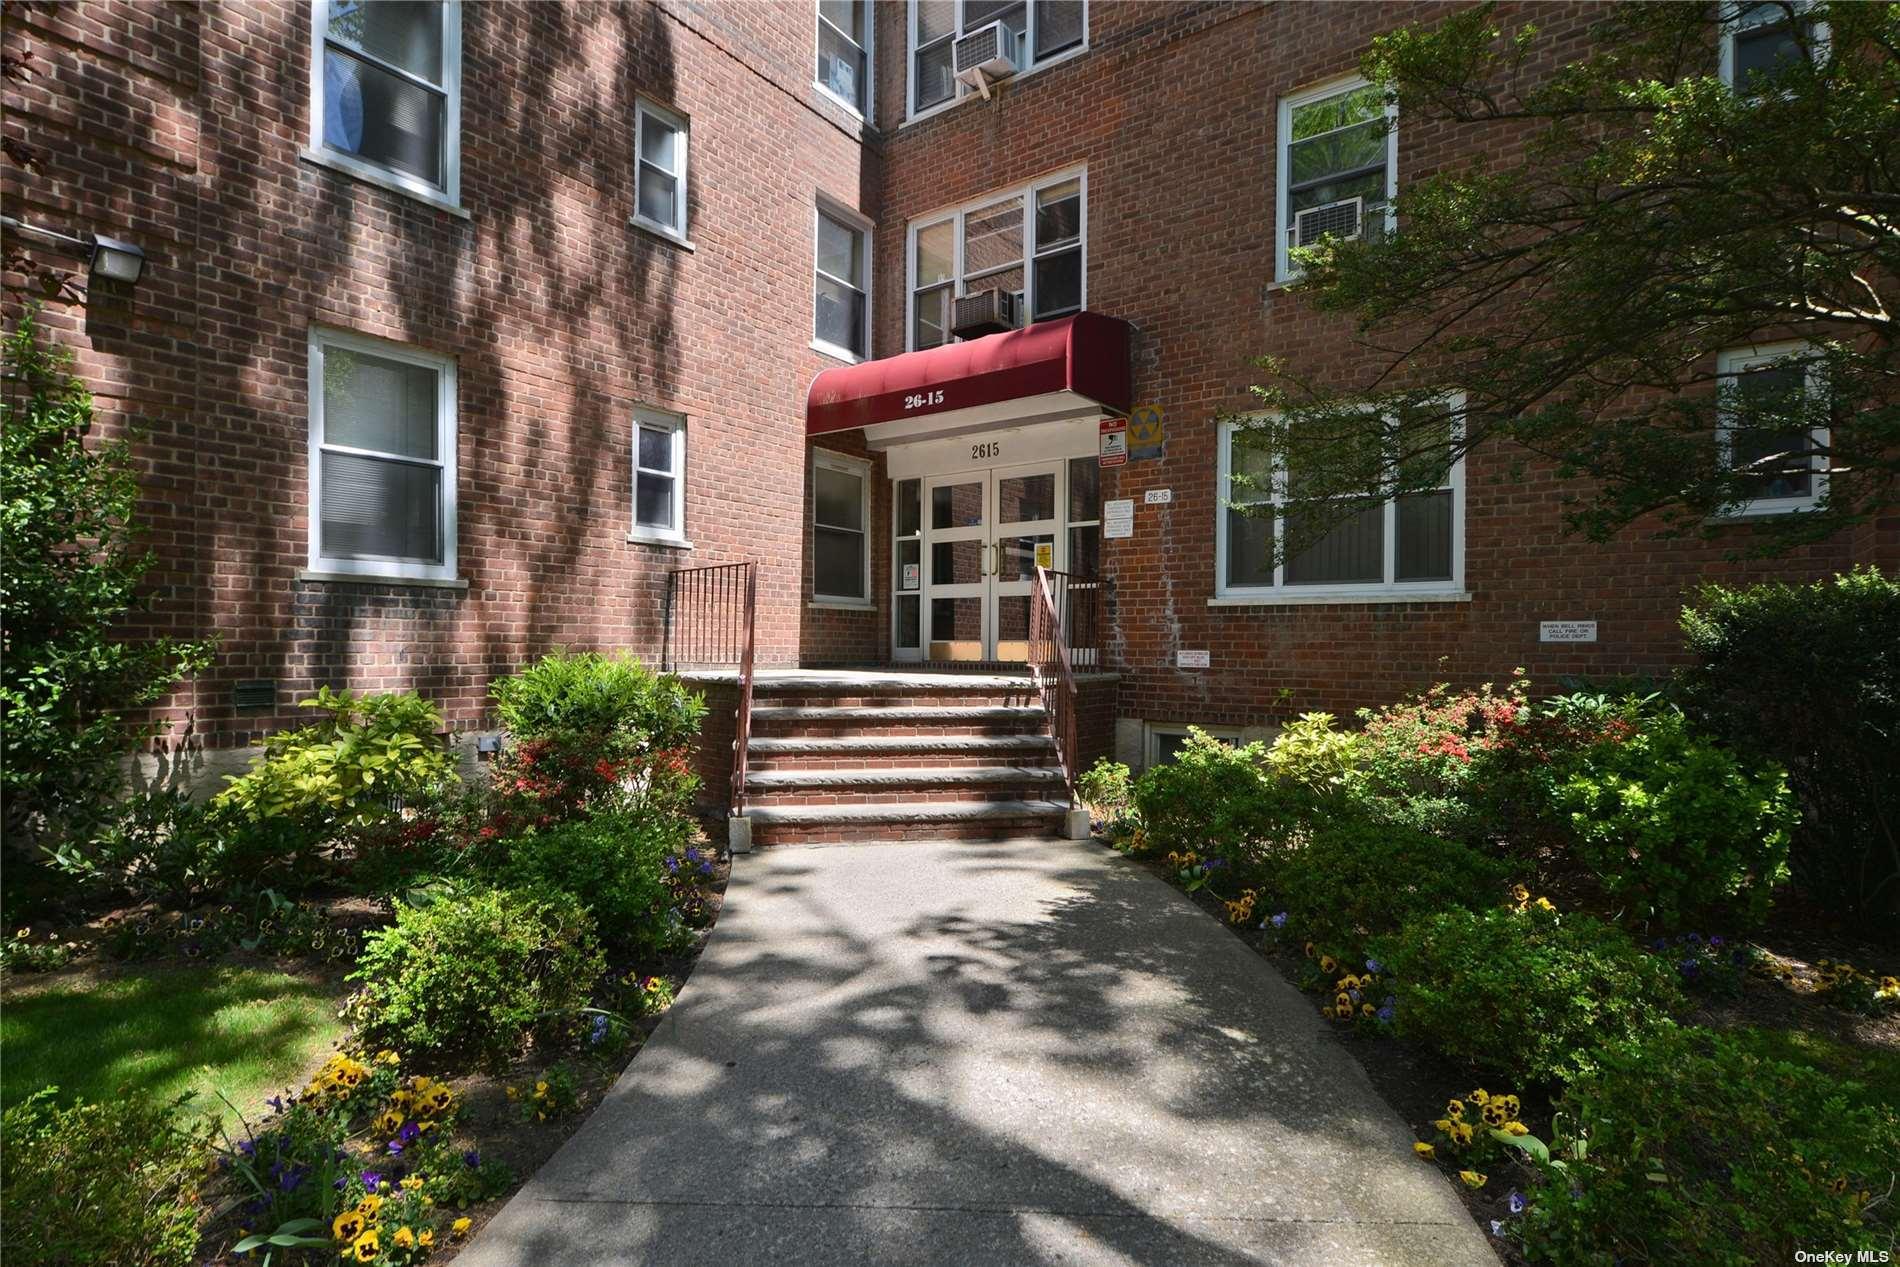 26-15 Parsons Boulevard #2C in Queens, Flushing, NY 11354